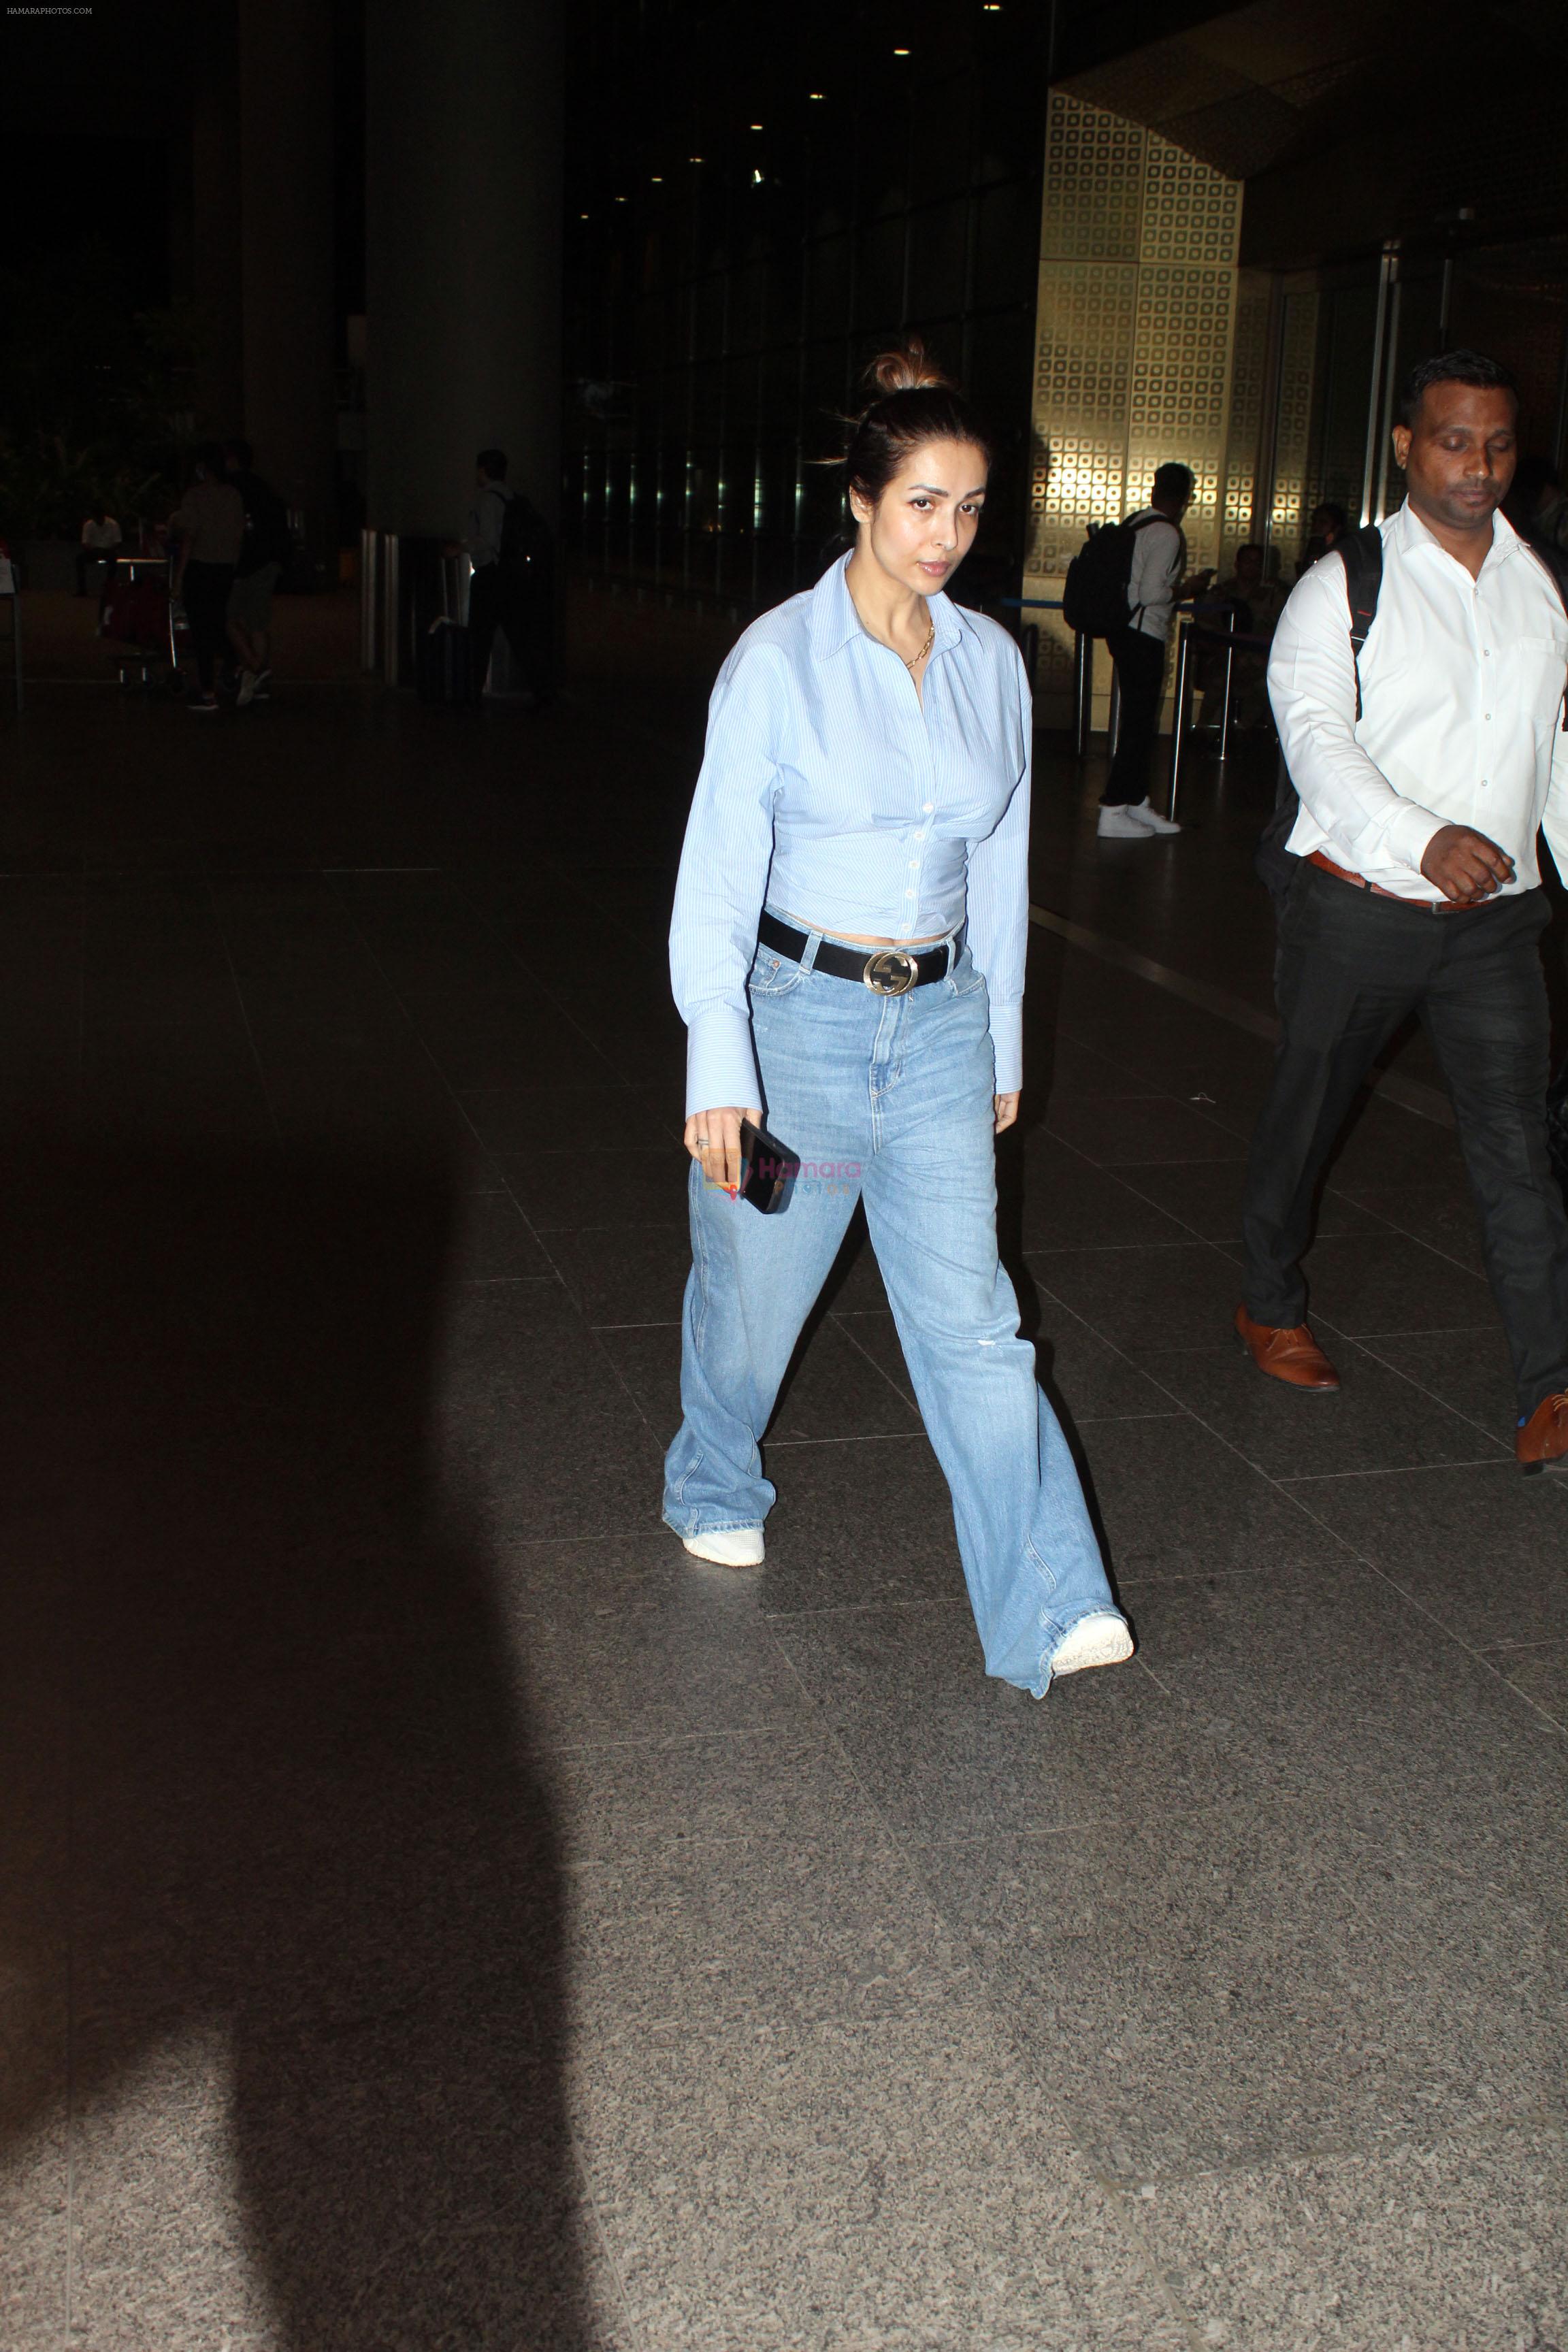 Malaika Arora dressed in blue shirt and pant seen at the airport on 16 Jun 2023